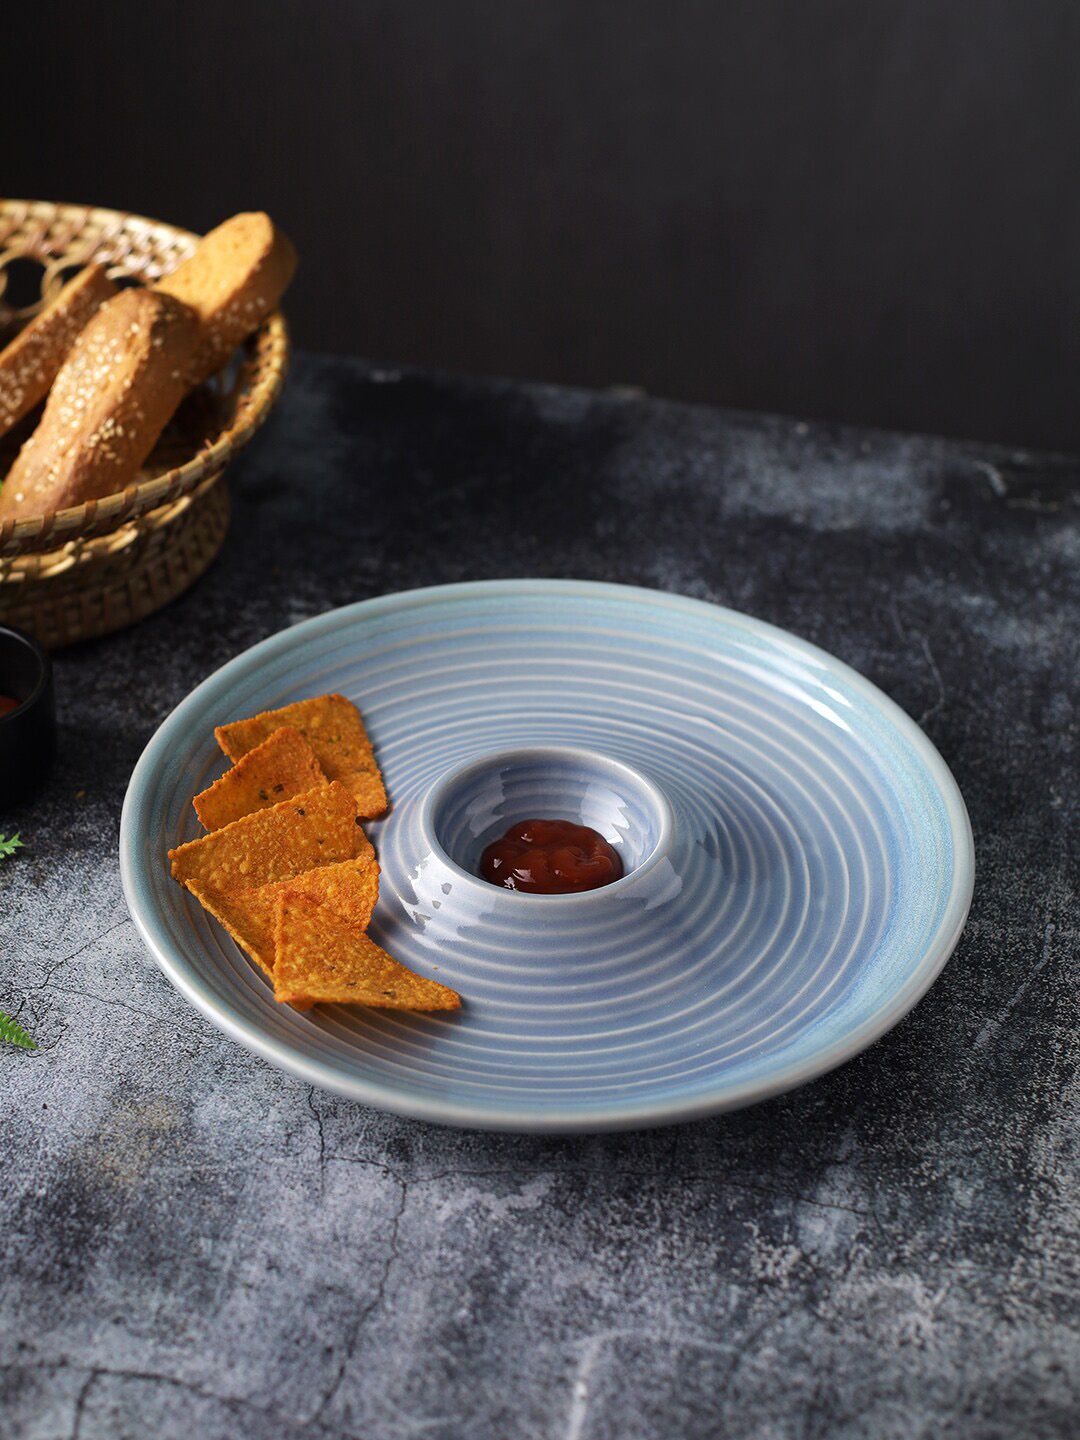 Aapno Rajasthan Blue Ceramic Stylish Chip & Dip Platter With Fixed Dip Bowl Price in India